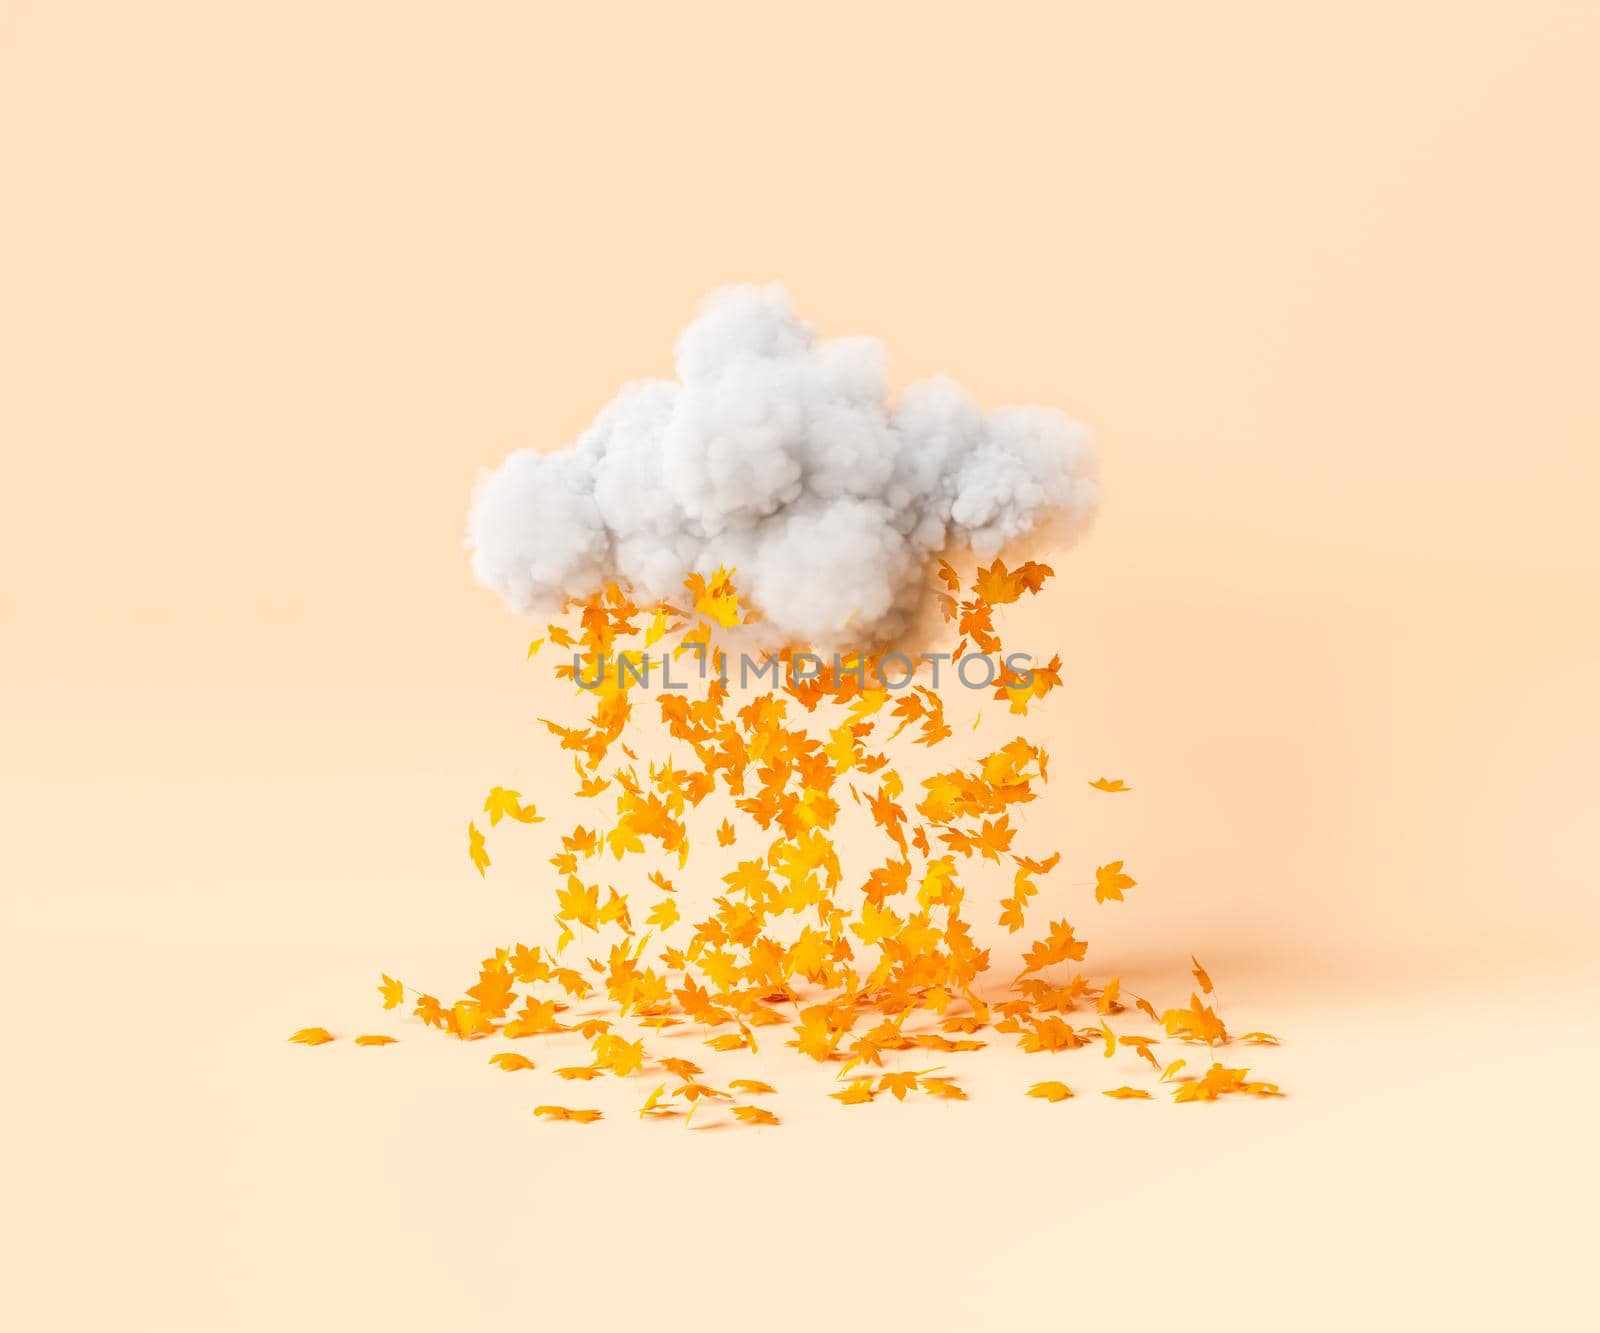 Creative 3D rendering of golden maple autumn leaves falling from fluffy gray cloud against beige background